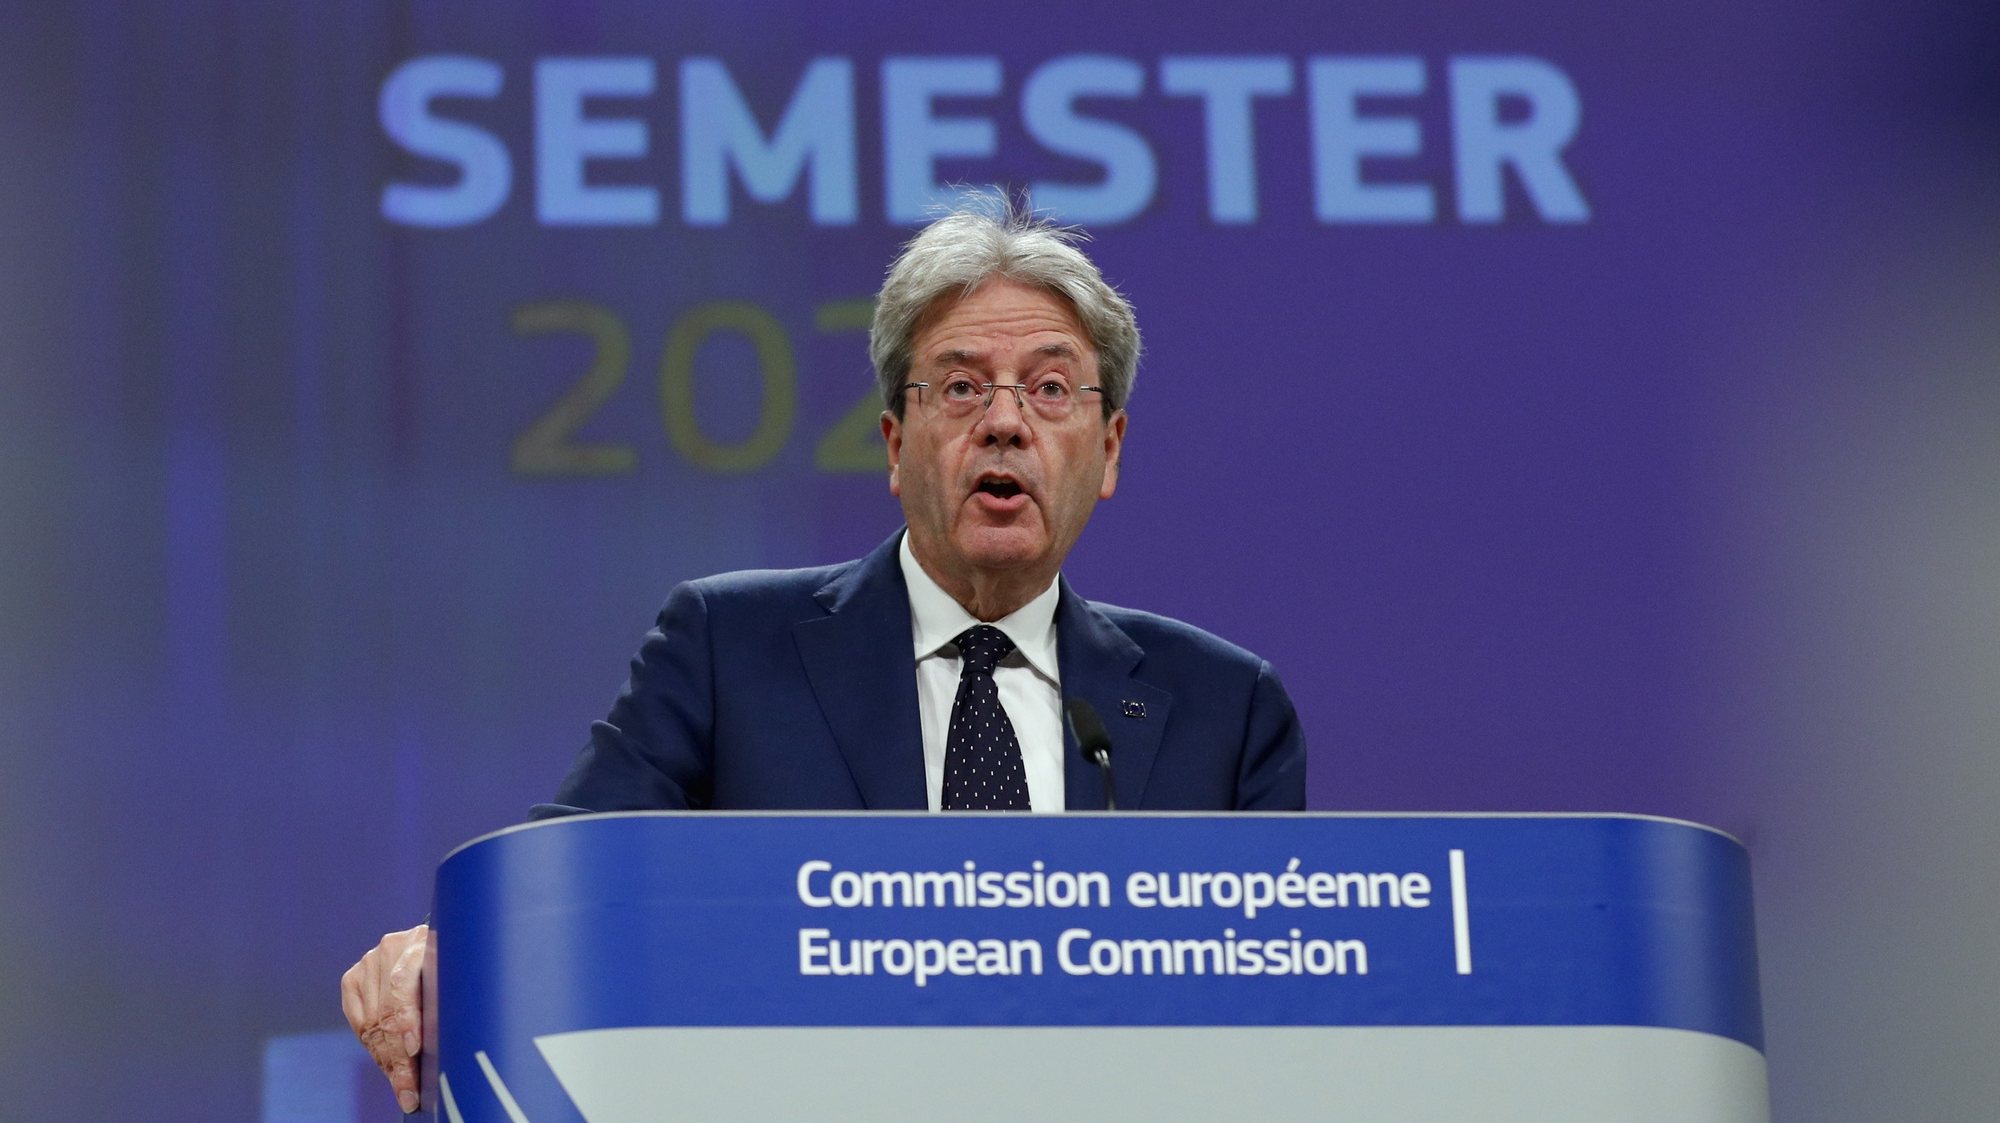 epa09242788 EU Commissioner for Economy Paolo Gentiloni speaks during a news conference on the European Semester Spring Package in Brussels, Belgium, 02 June 2021.  EPA/JOHANNA GERON / POOL